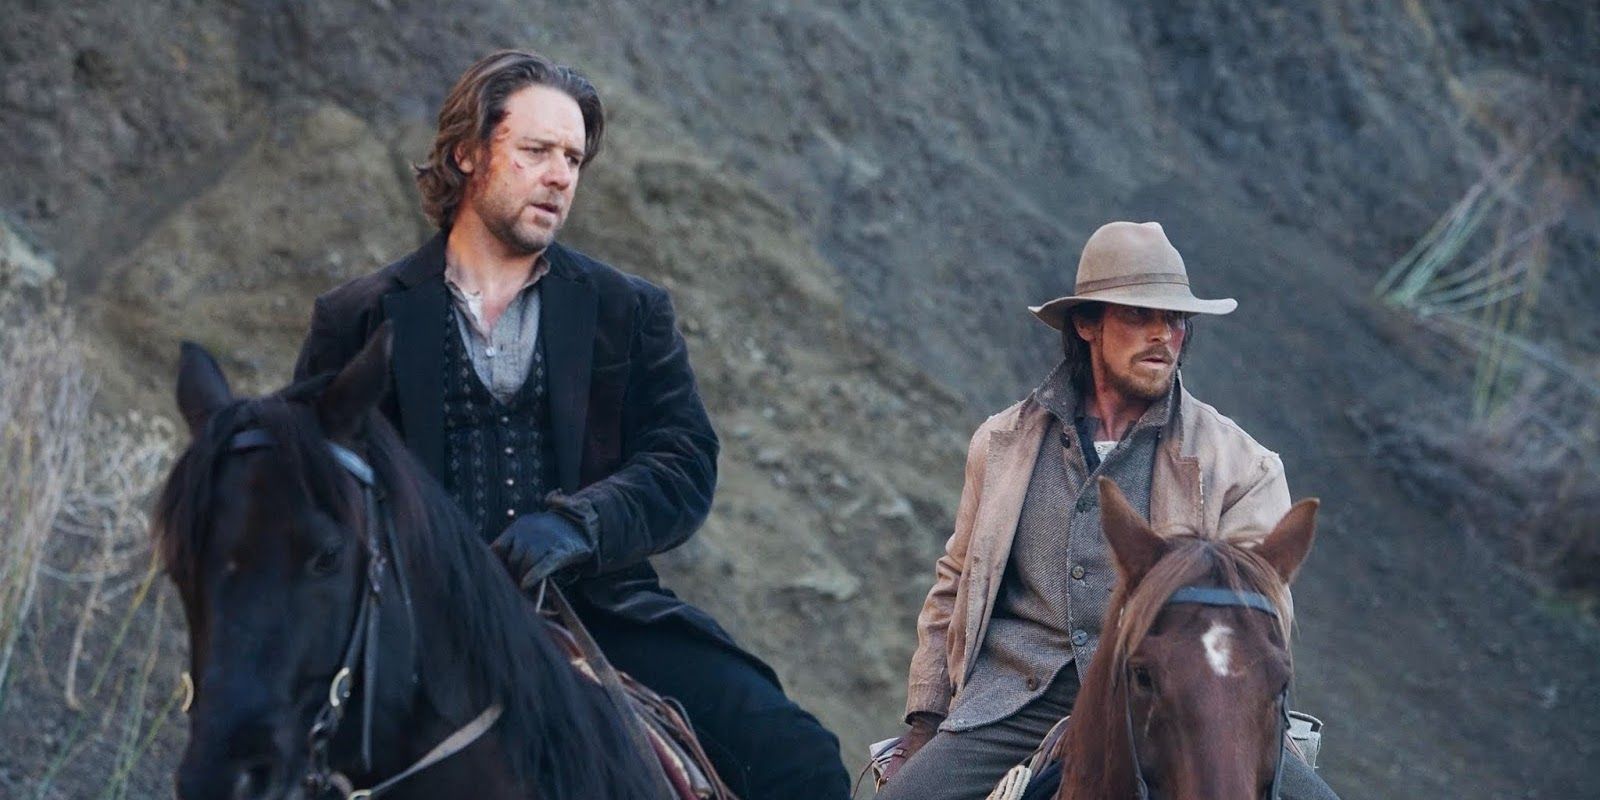 Russell Crowe and Christian Bale riding horses in 3:10 to Yuma from 2007